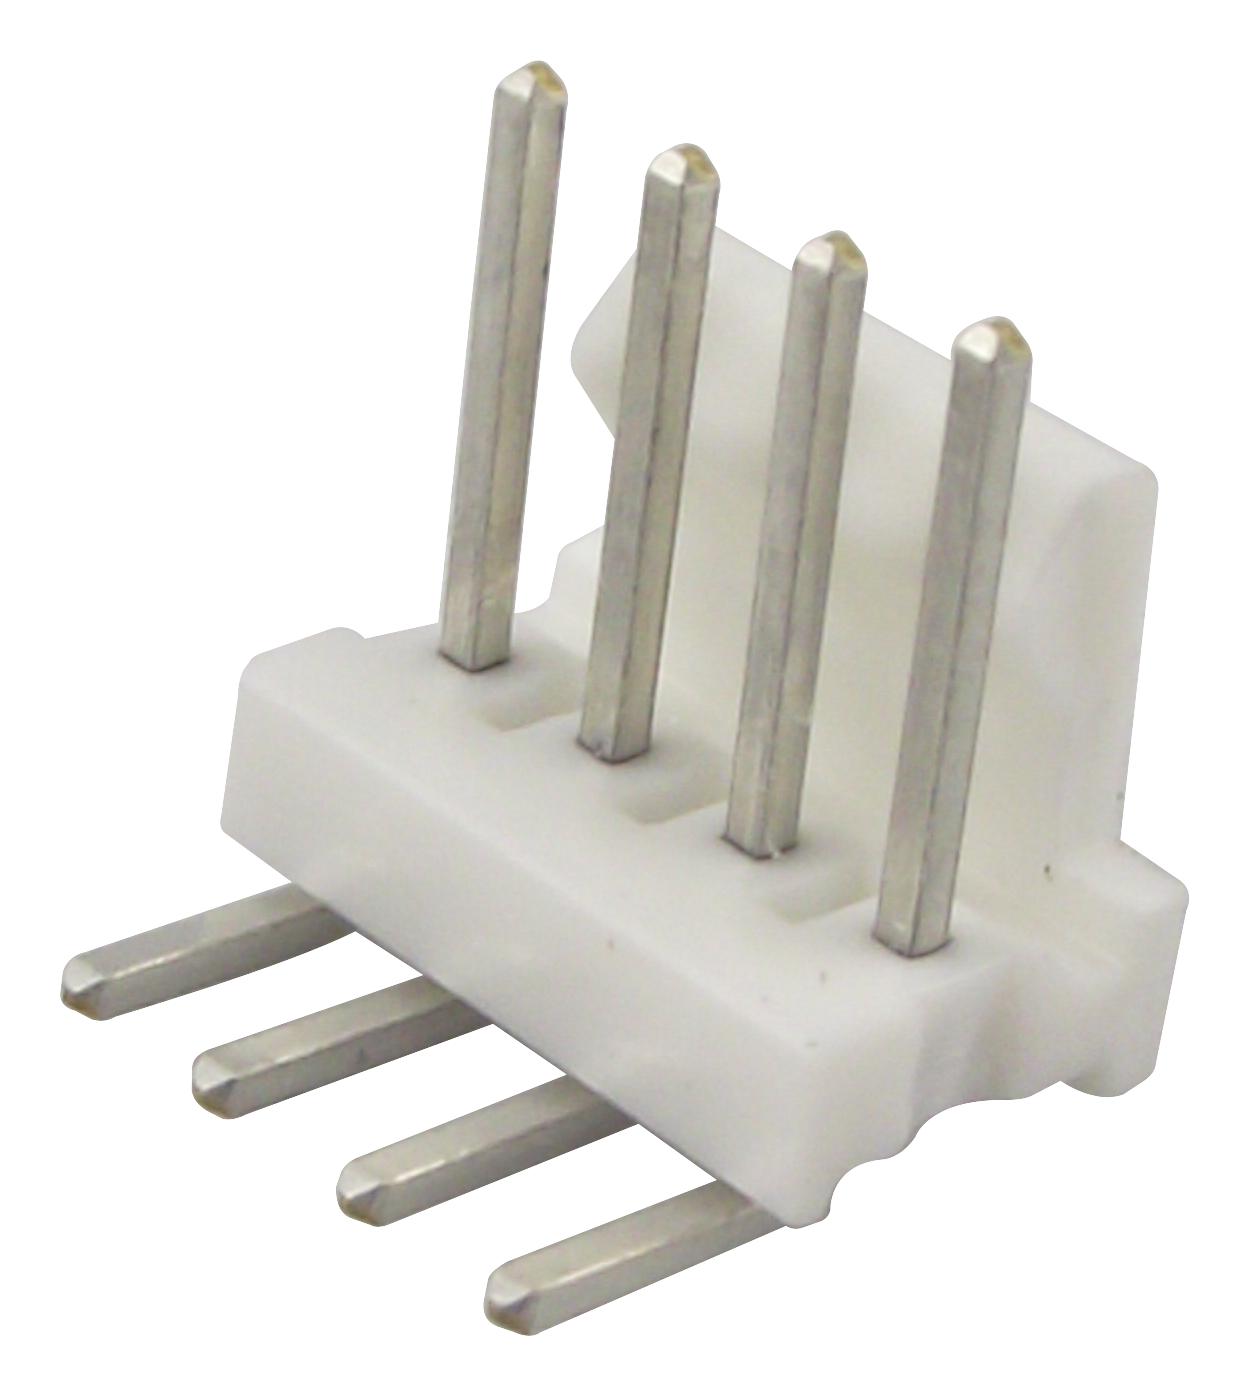 640457-4 HEADER, RIGHT ANGLE, 0.1", 4WAY AMP - TE CONNECTIVITY